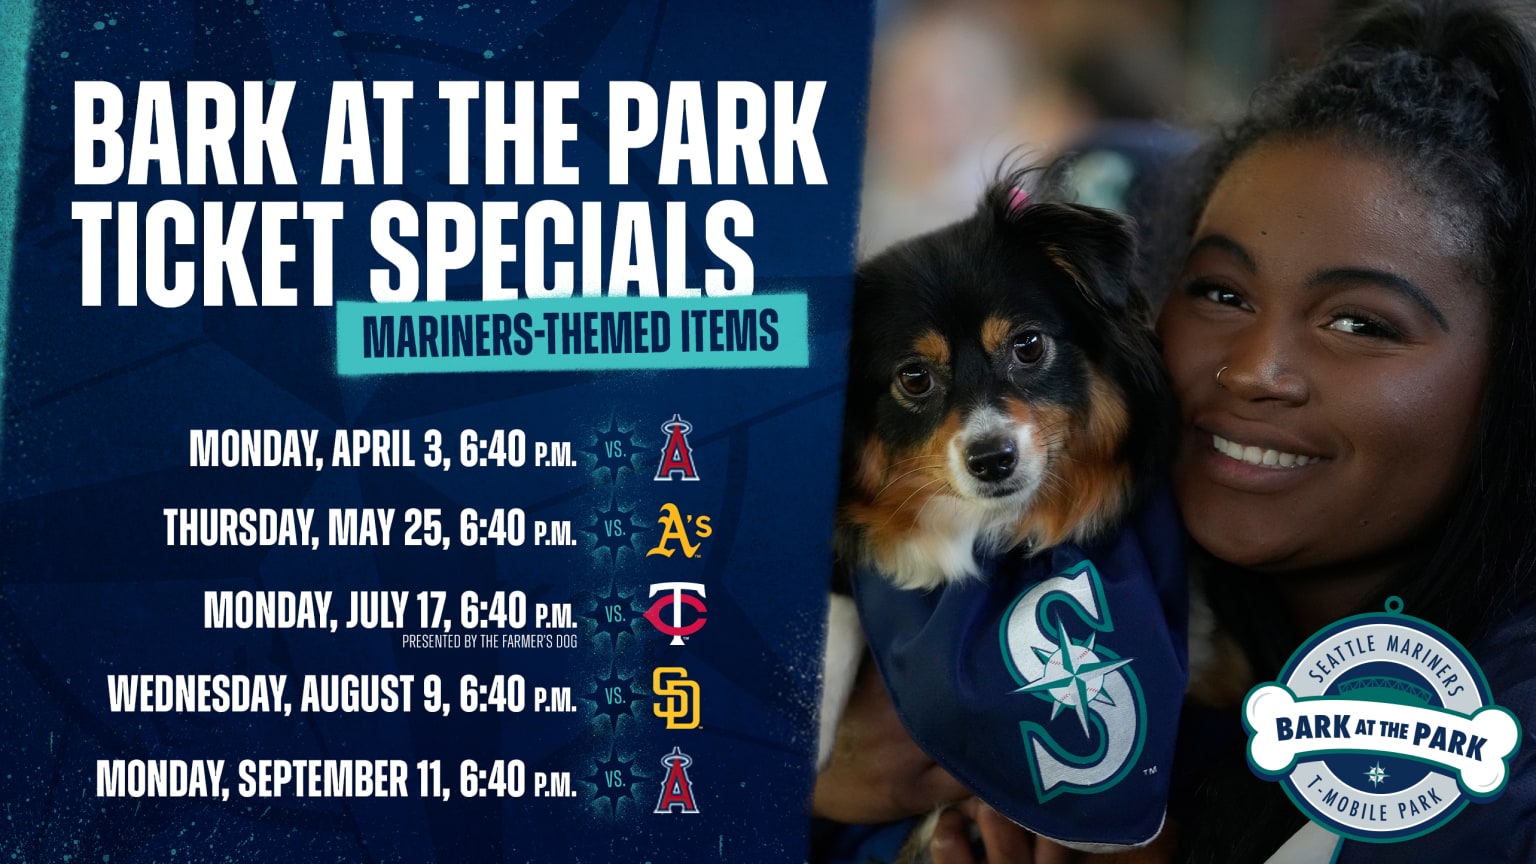 Who Let The Dogs In (To Safeco Field)? Mariners Host Bark in the